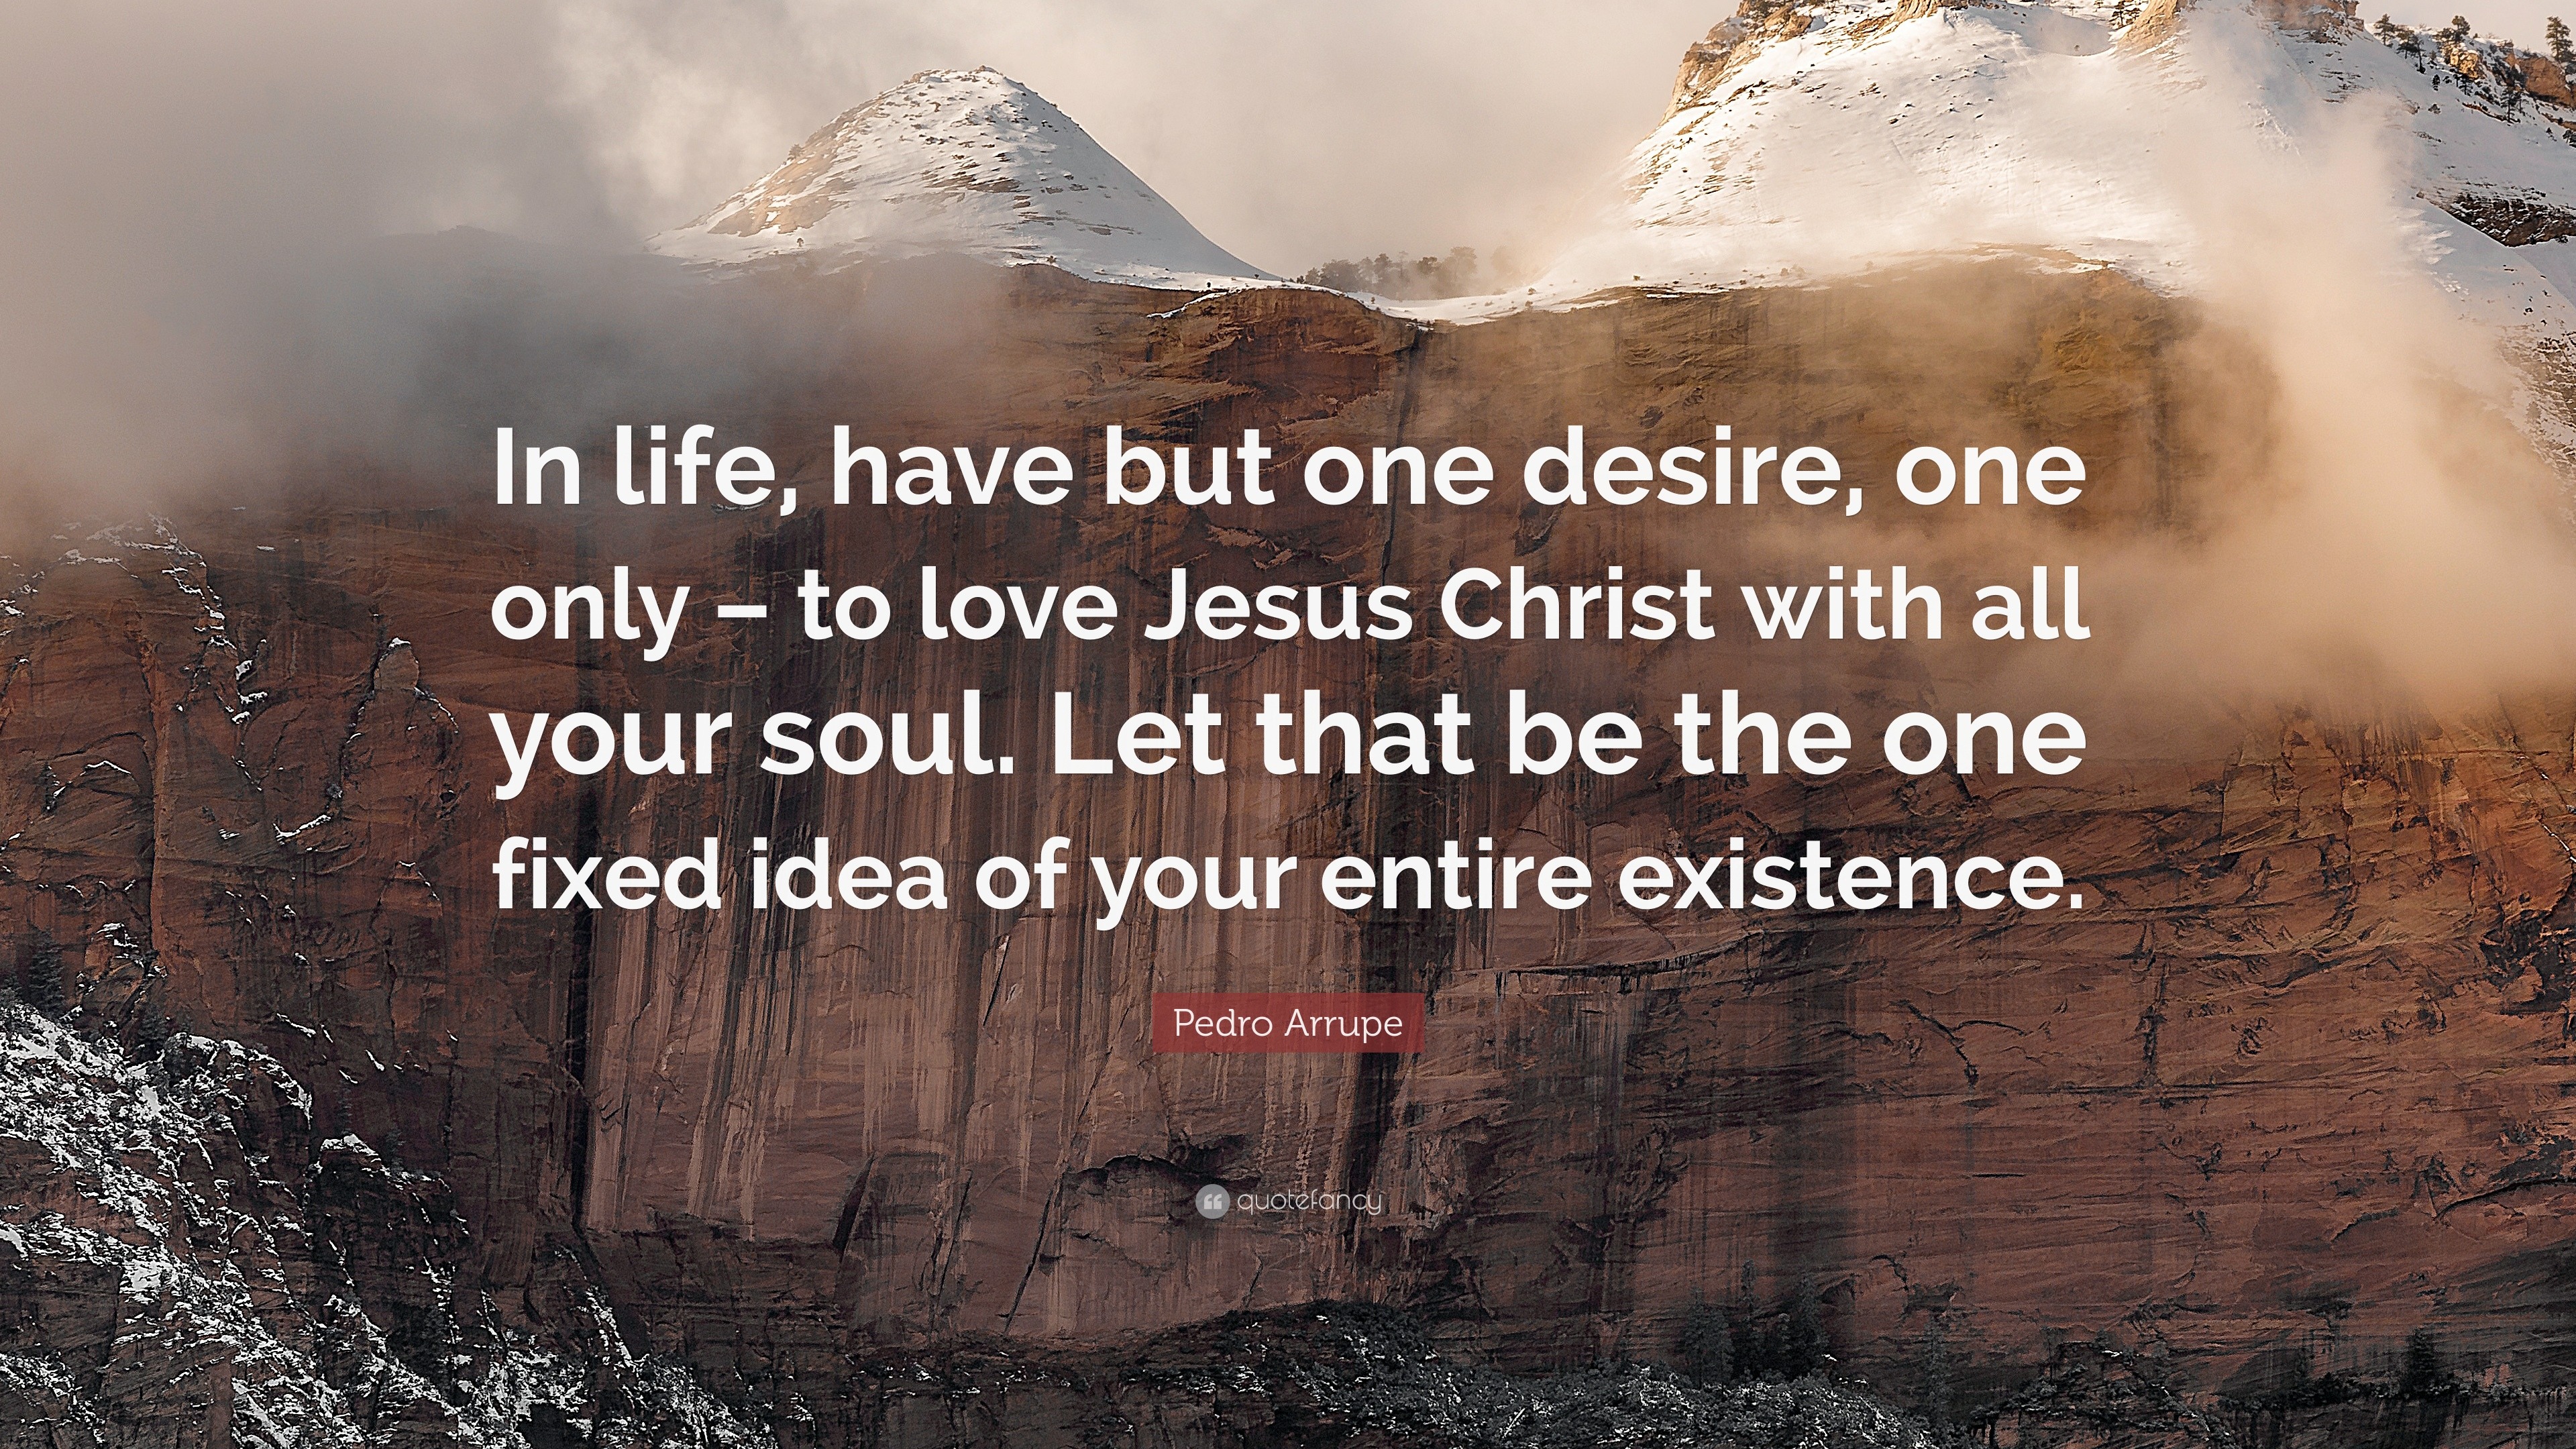 Pedro Arrupe Quote: “In life, have but one desire, one only – to love ...